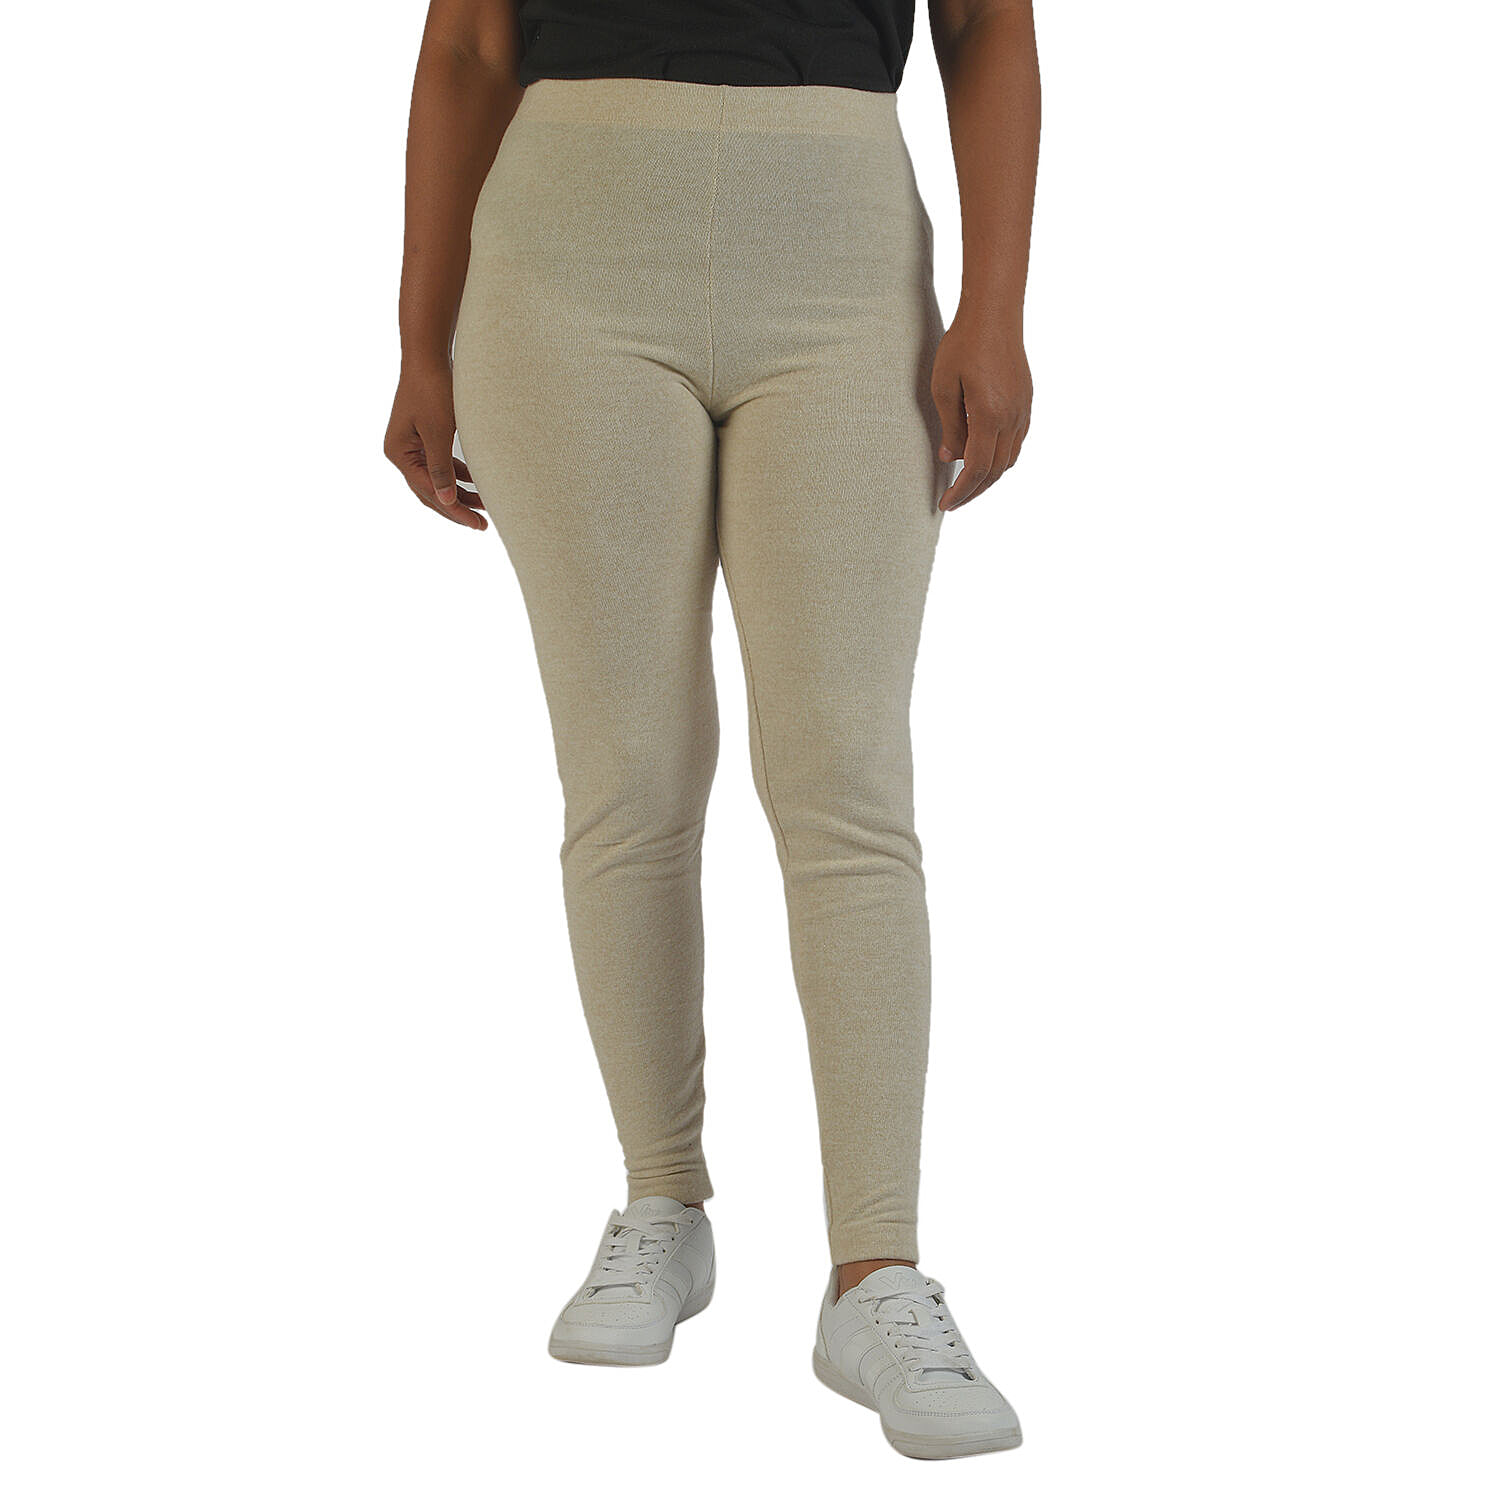 EVERYDAY LEGGINGS - PLUS SIZE (Fits 12-24 or L, XL, XXL) | Luvin Stuff  Boutique